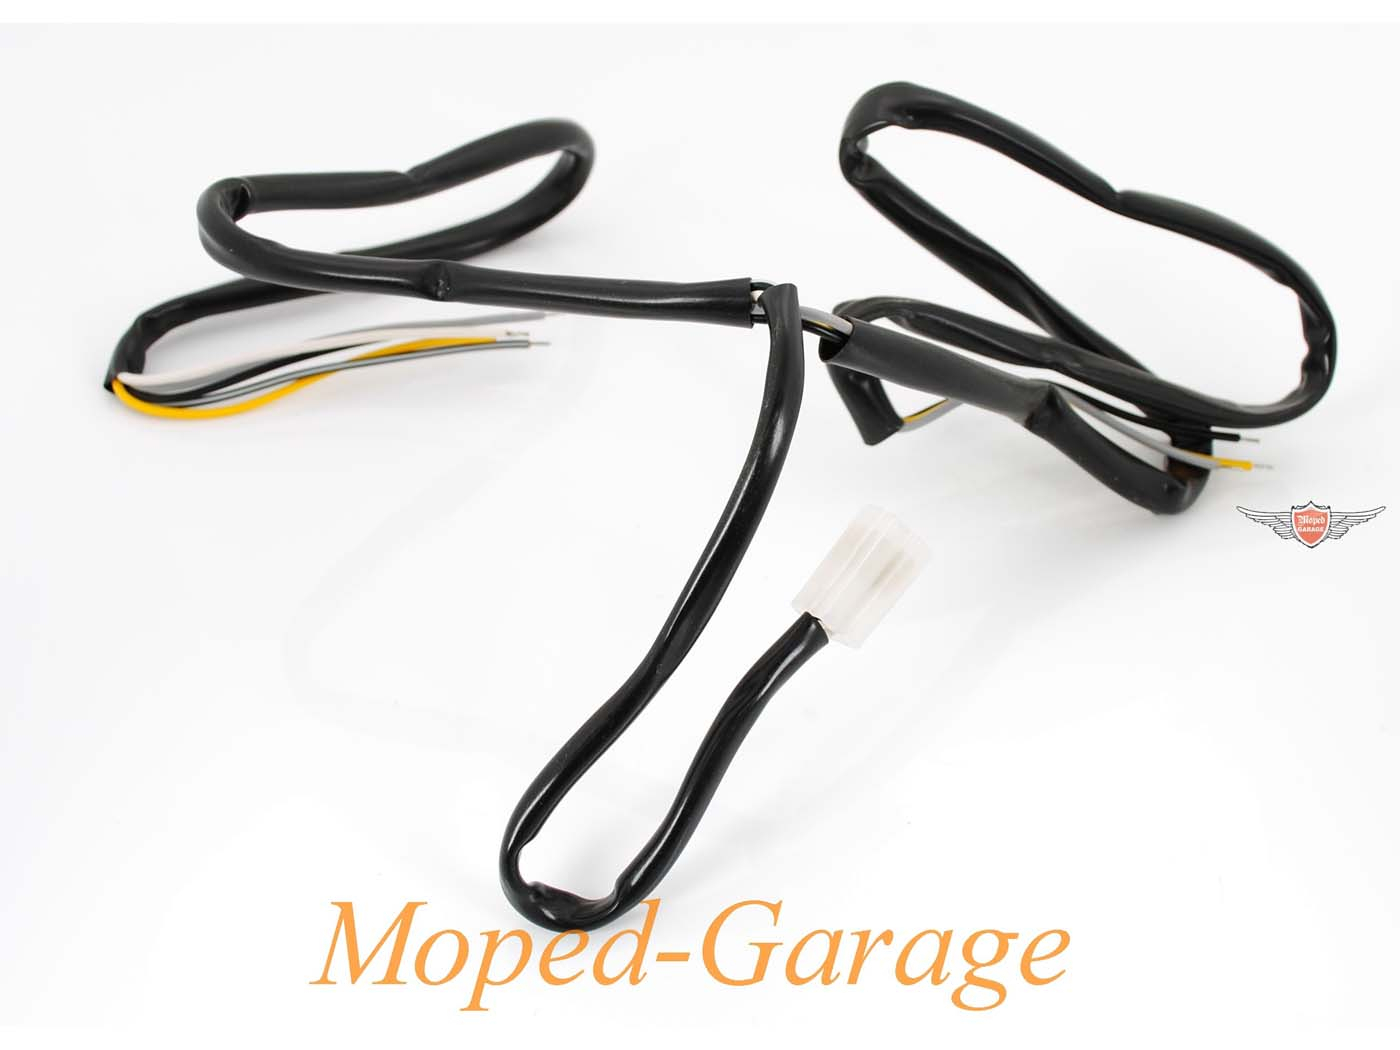 Wiring Harness Moped For Puch Maxi Moped, Moped, Mokick